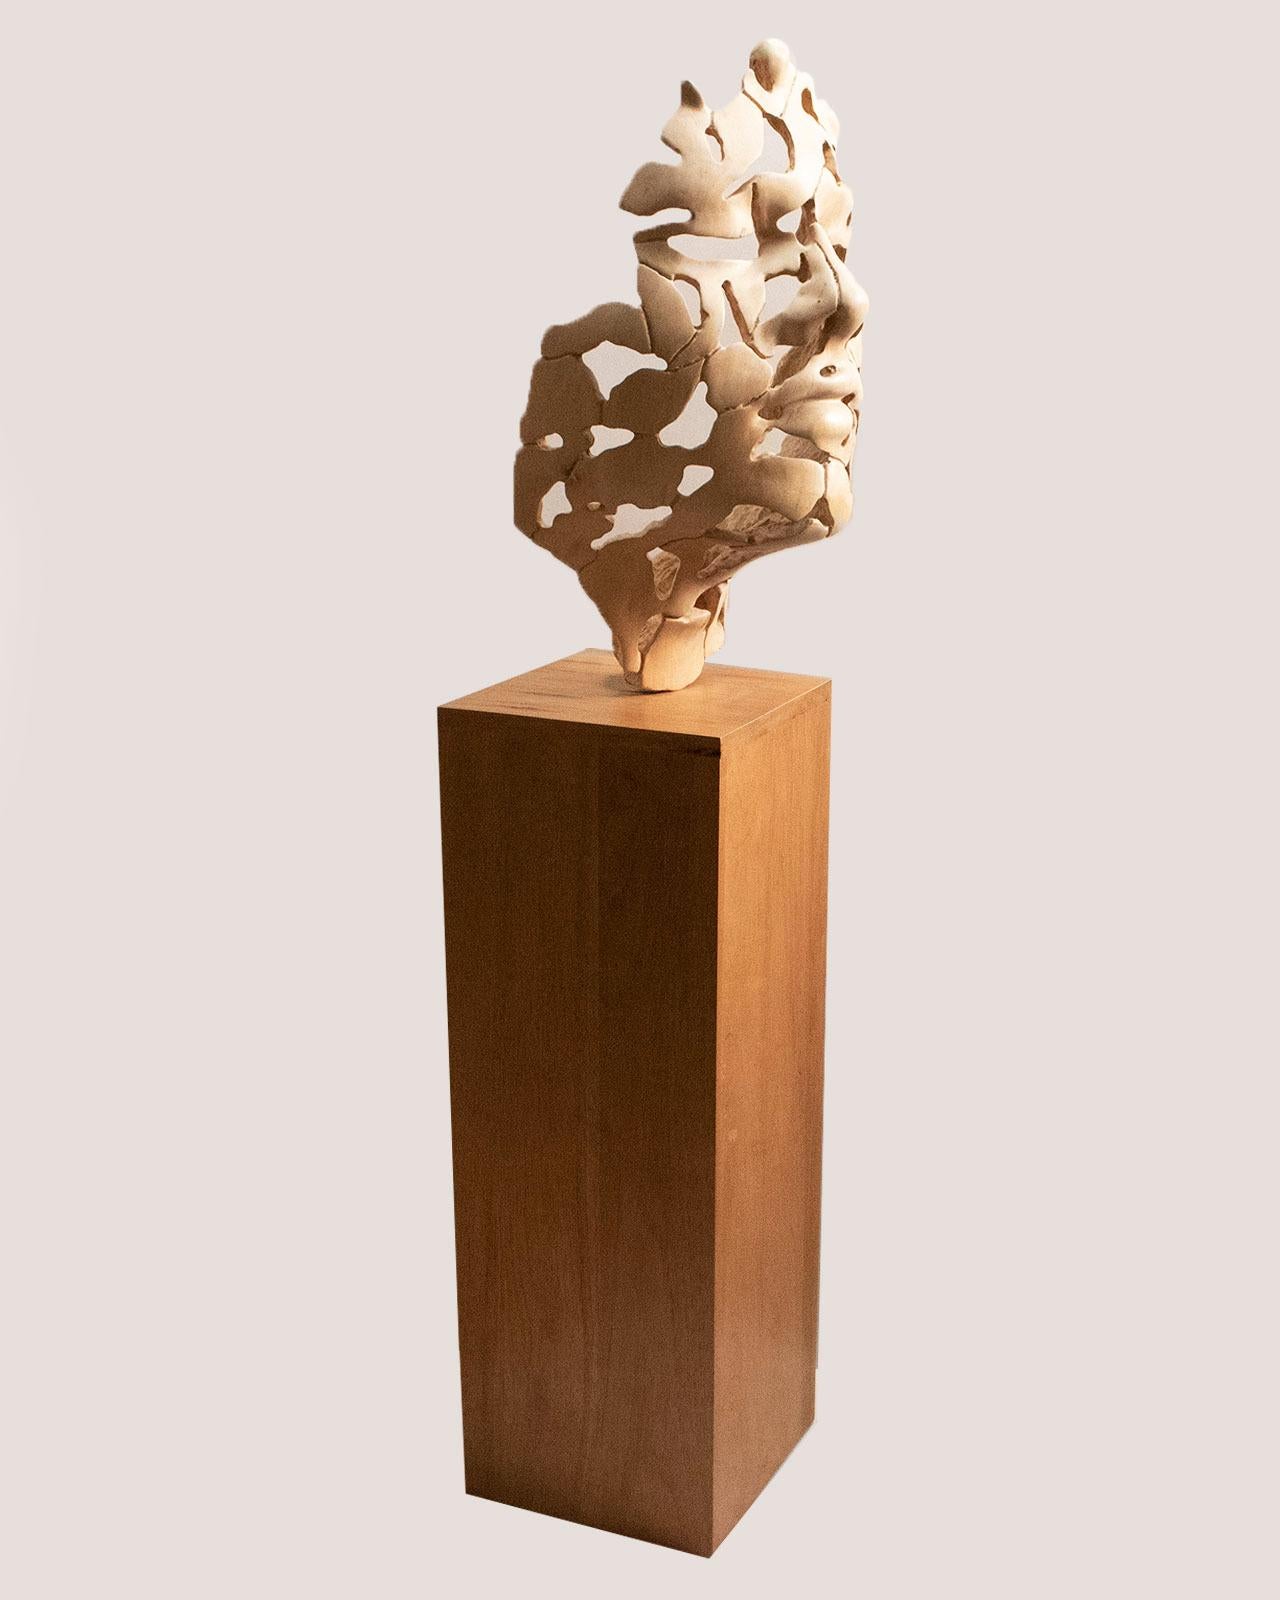 Essence of Youth Wood 72 – Miguel Guía Neo-Expressionist Birch wood Sculpture For Sale 4